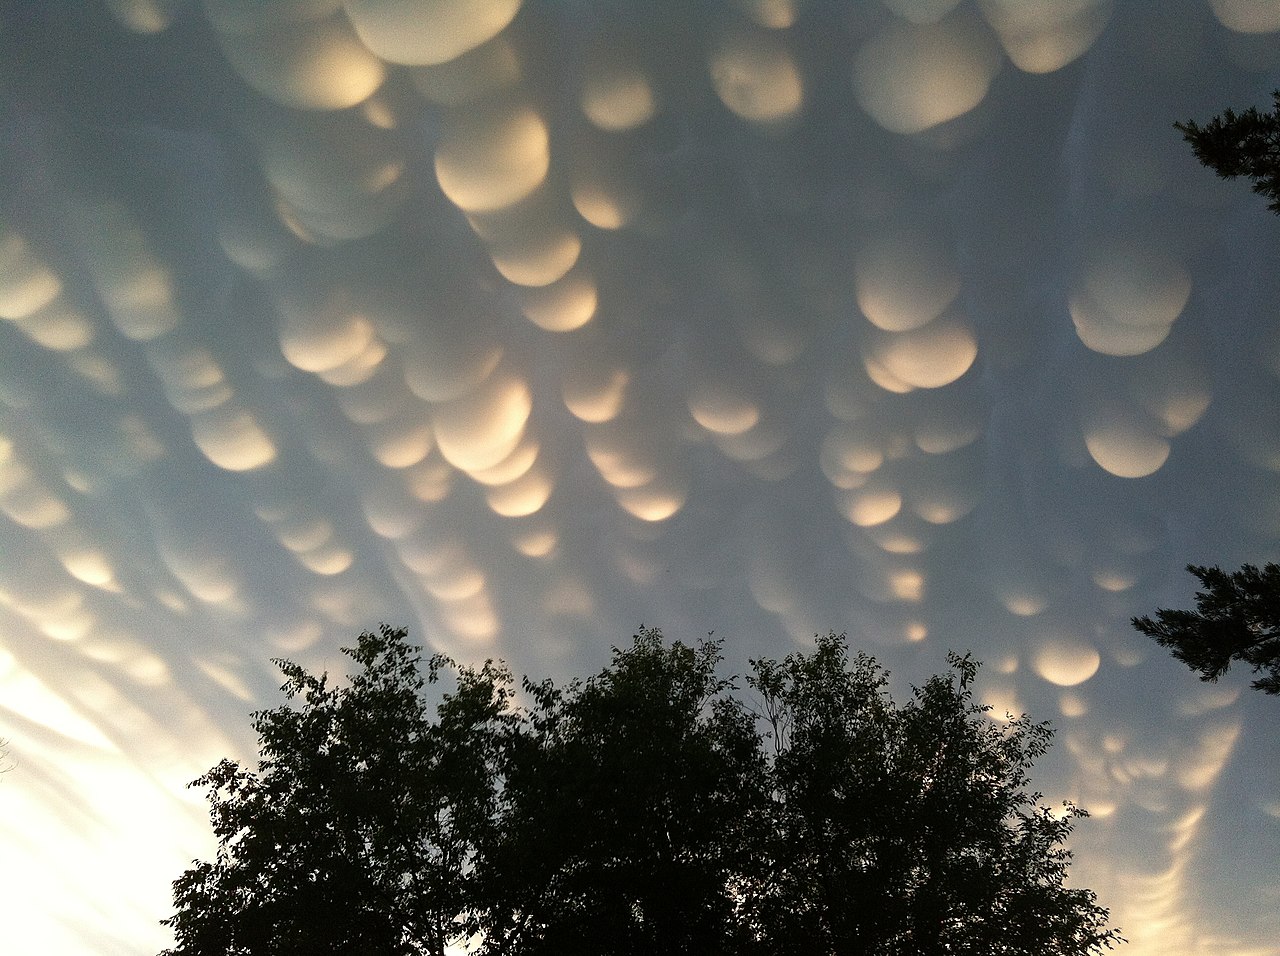 Formation of mammatus clouds over the city of Regina Saskatchewan on 2012-06-26 following a severe storm warning and tornado watch.